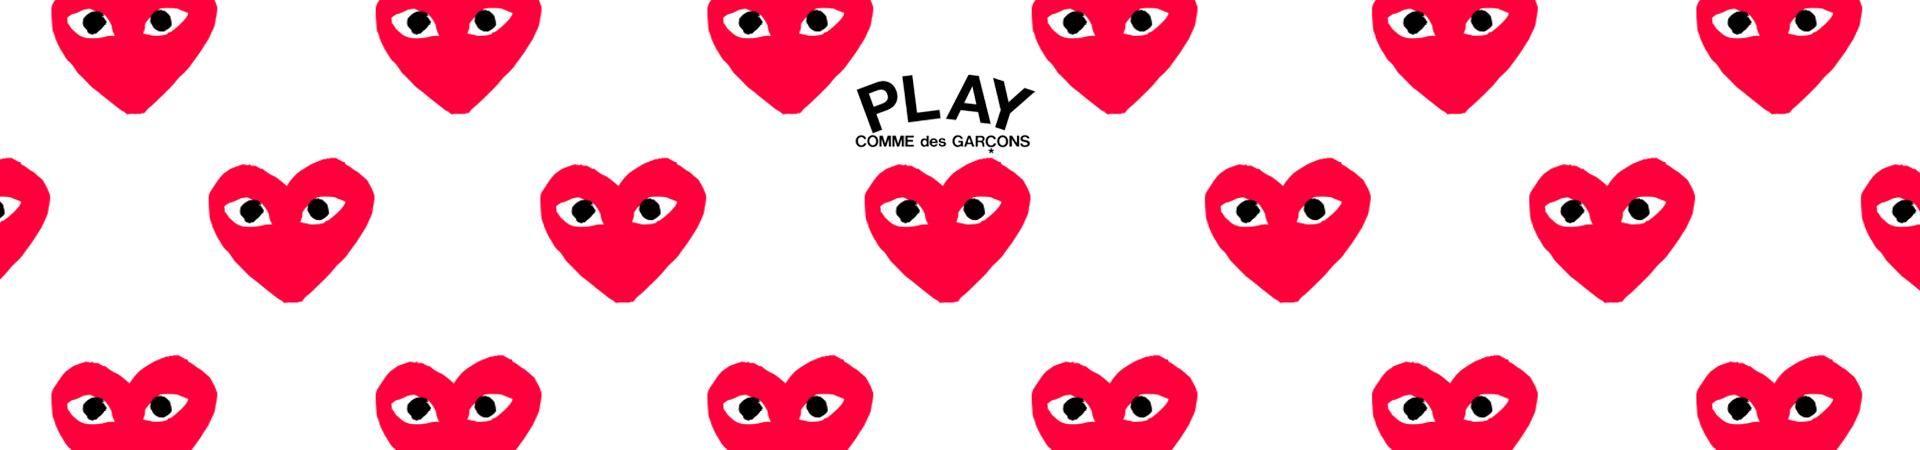 Cdg Wallpapers  Top 11 Best Cdg Wallpapers  HQ 